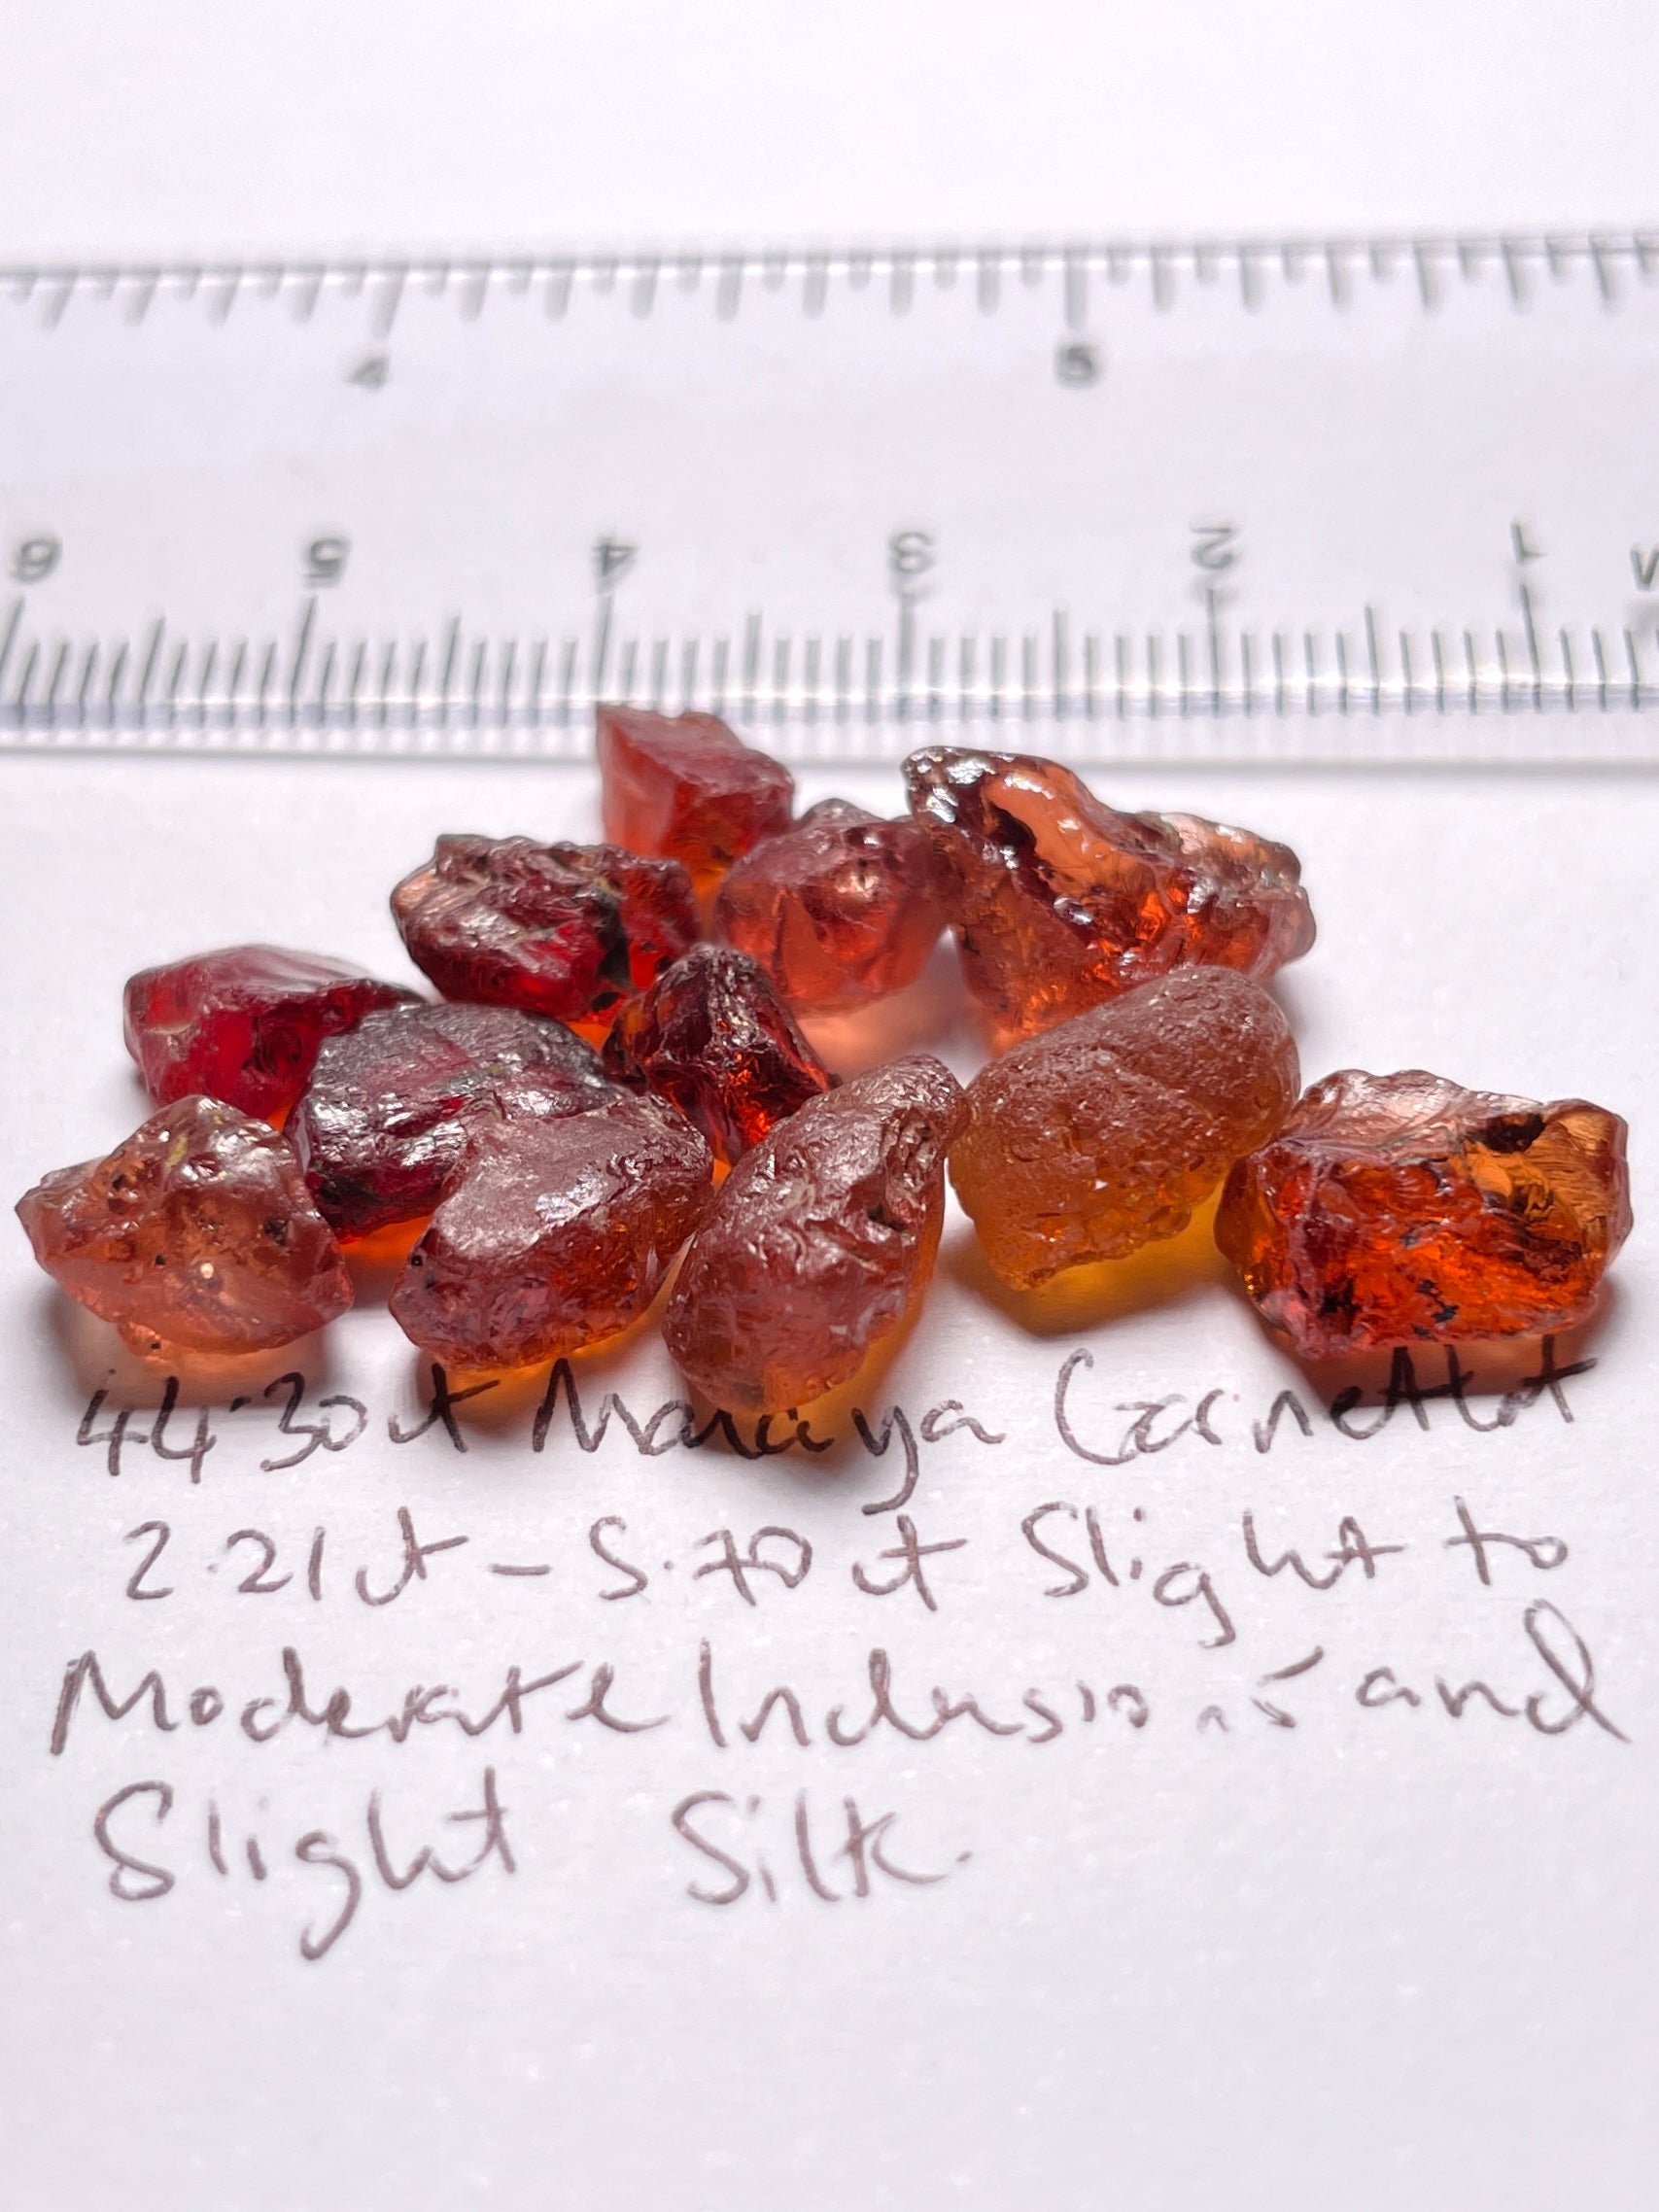 44.30Ct Malaya Garnet Lot All Have Slight To Moderate Inclusions And Silk Tanzania Untreated